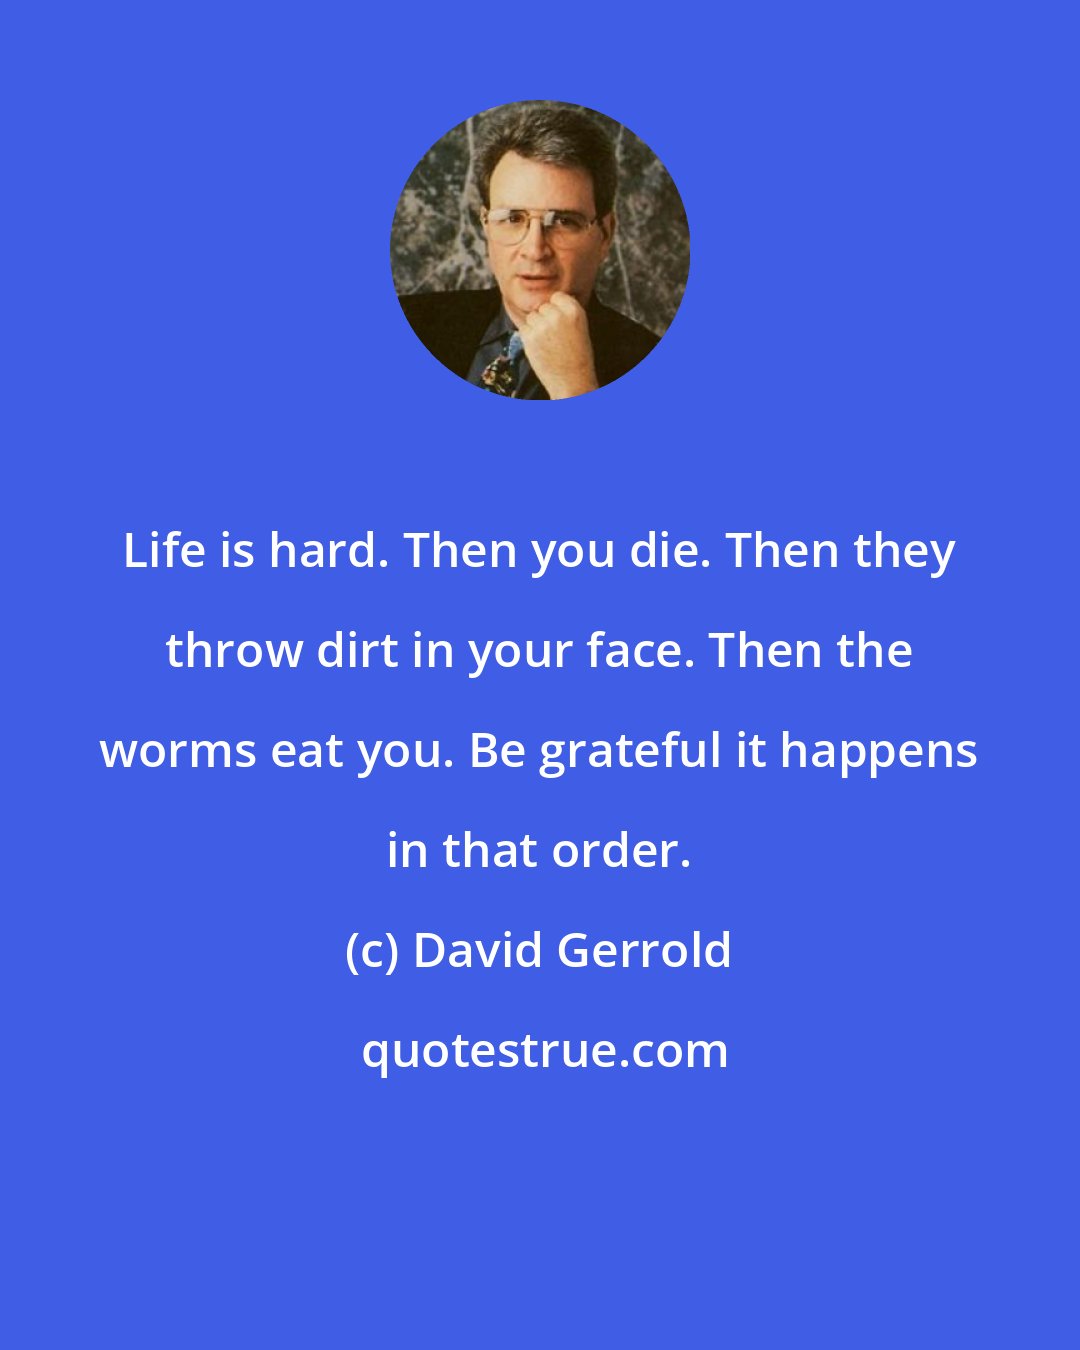 David Gerrold: Life is hard. Then you die. Then they throw dirt in your face. Then the worms eat you. Be grateful it happens in that order.